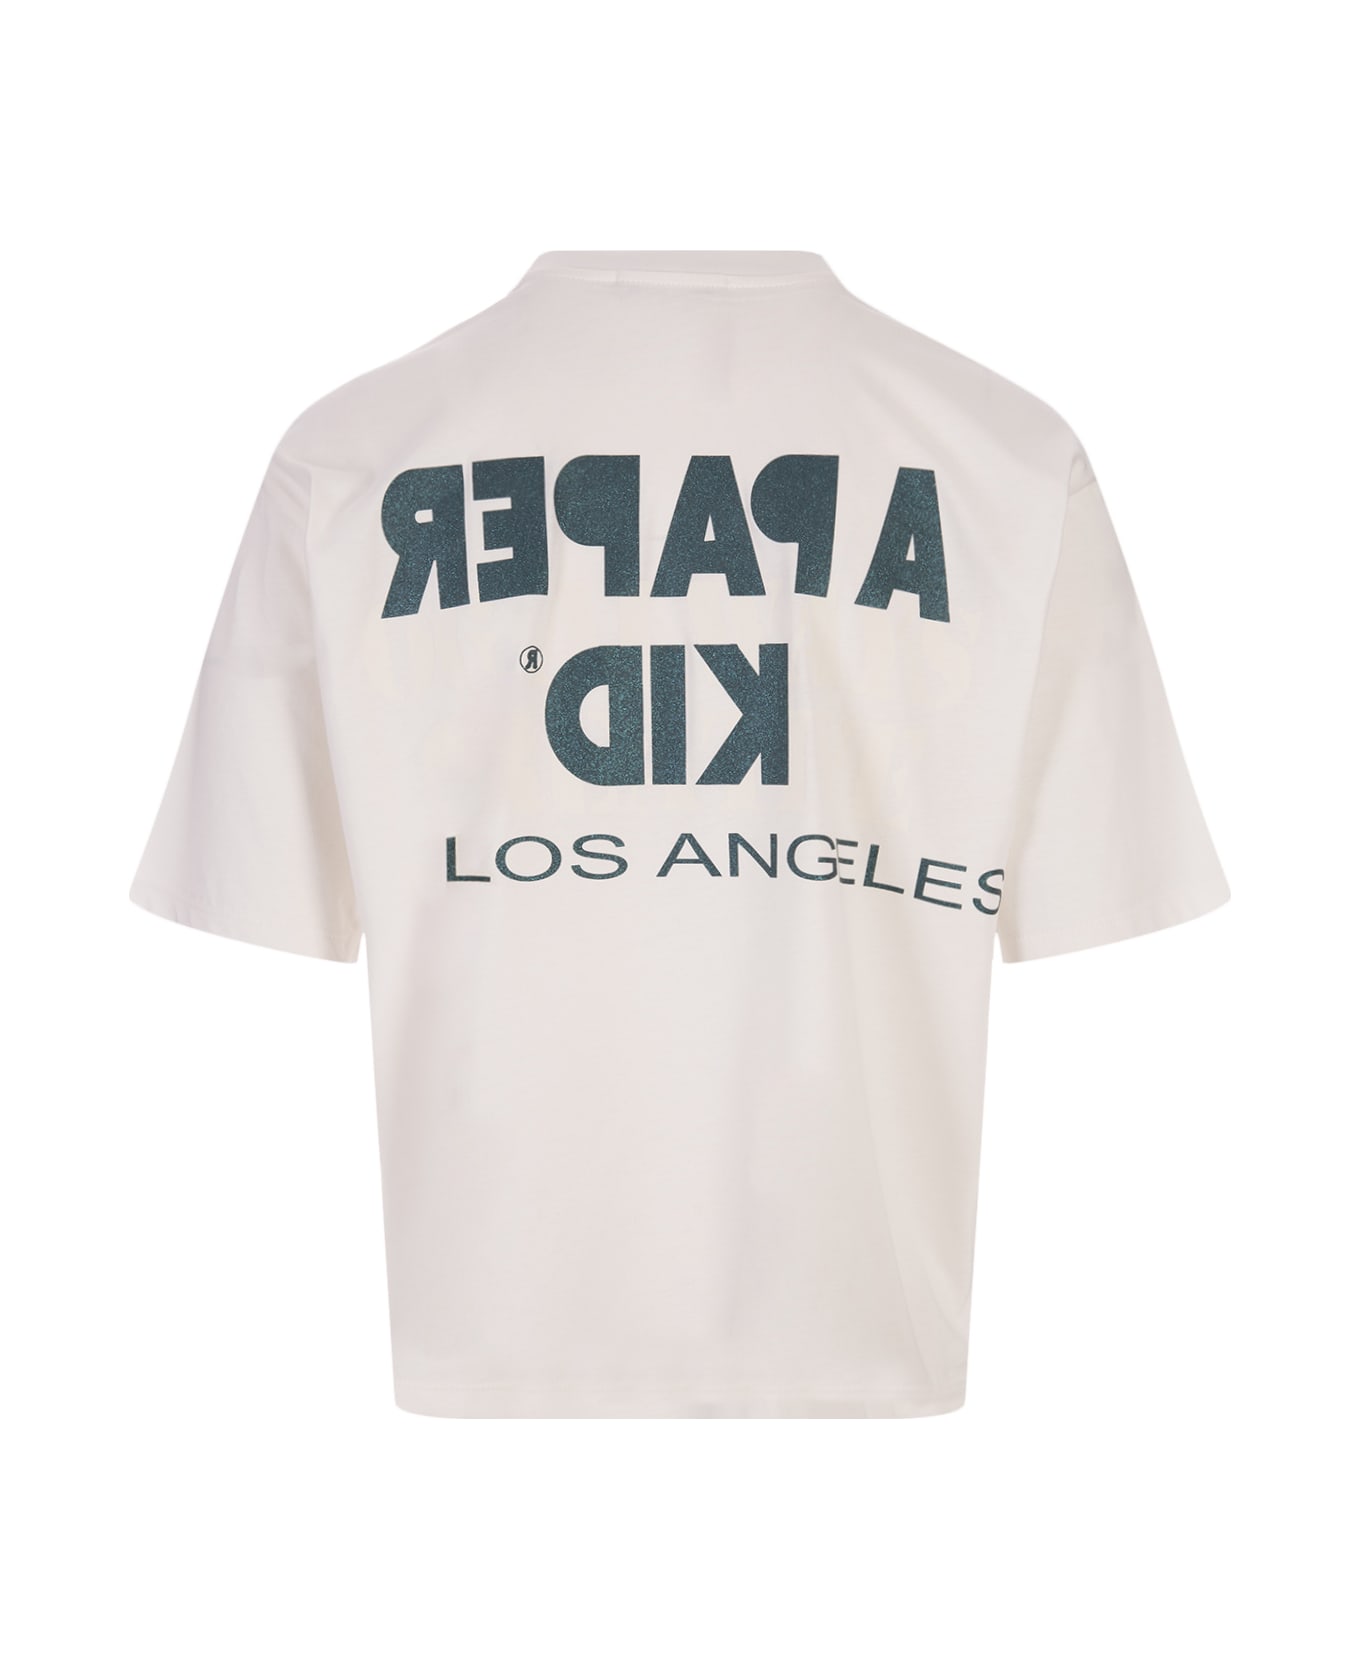 A Paper Kid Los Angeles T-shirt In White - White